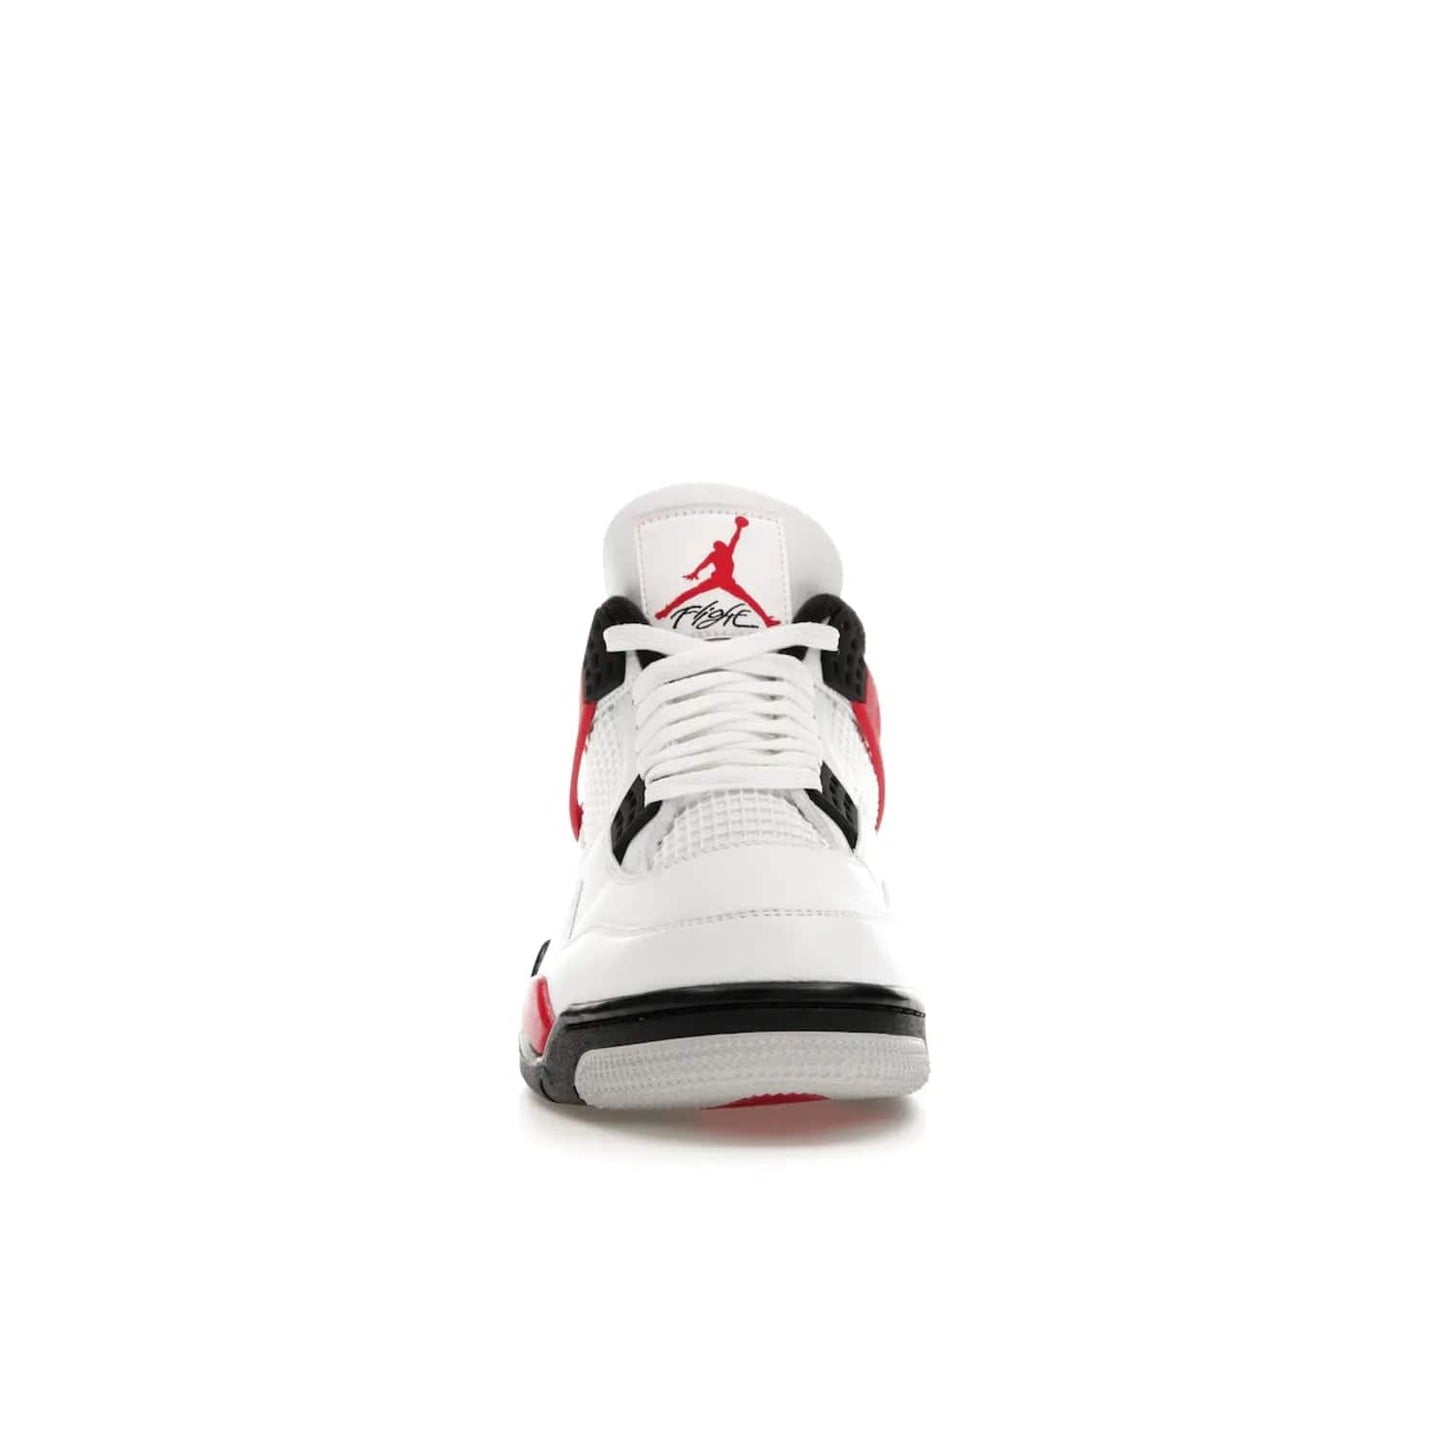 Jordan 4 Retro Red Cement - Image 10 - Only at www.BallersClubKickz.com - Iconic Jordan silhouette with a unique twist. White premium leather uppers with fire red and black detailing. Black, white, and fire red midsole with mesh detailing and Jumpman logo. Jordan 4 Retro Red Cement released with premium price.